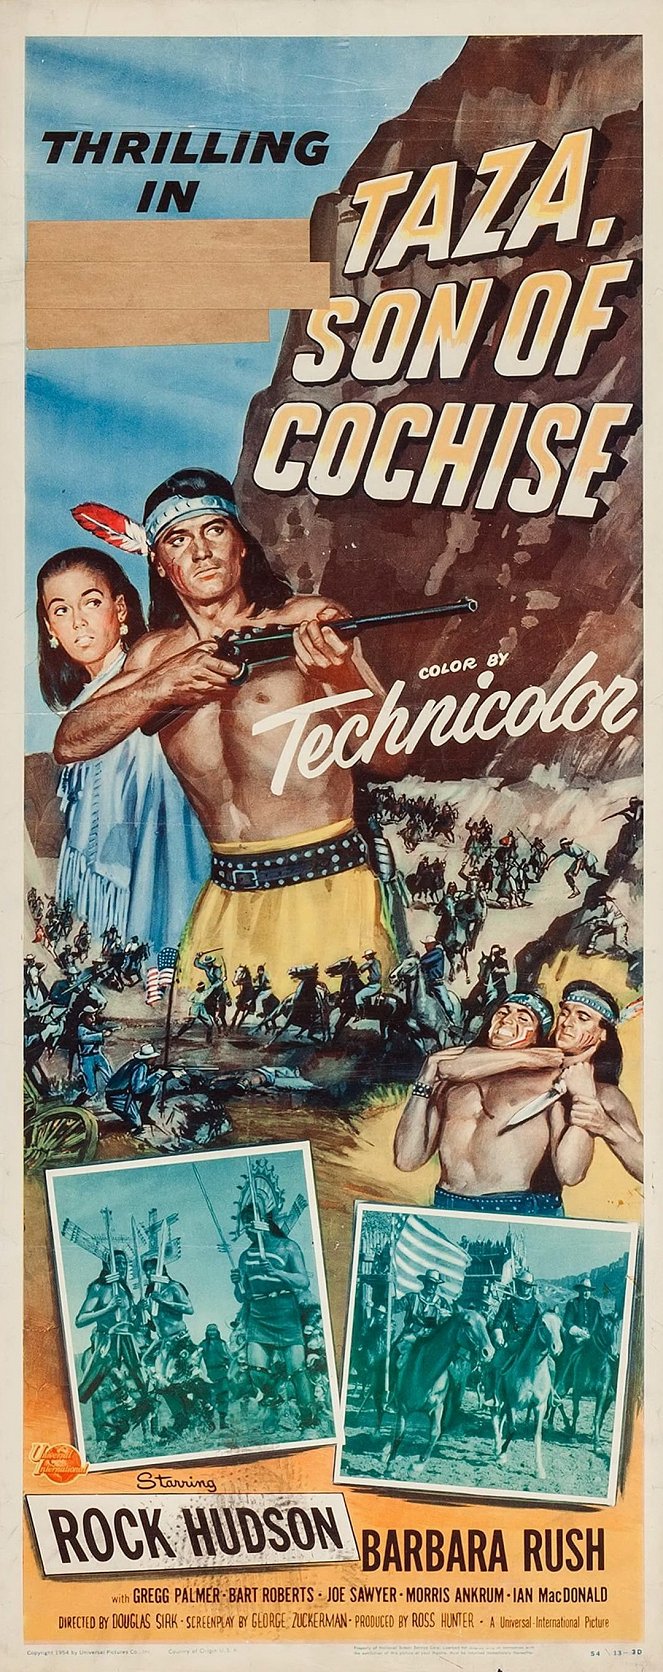 Taza, Son of Cochise - Posters